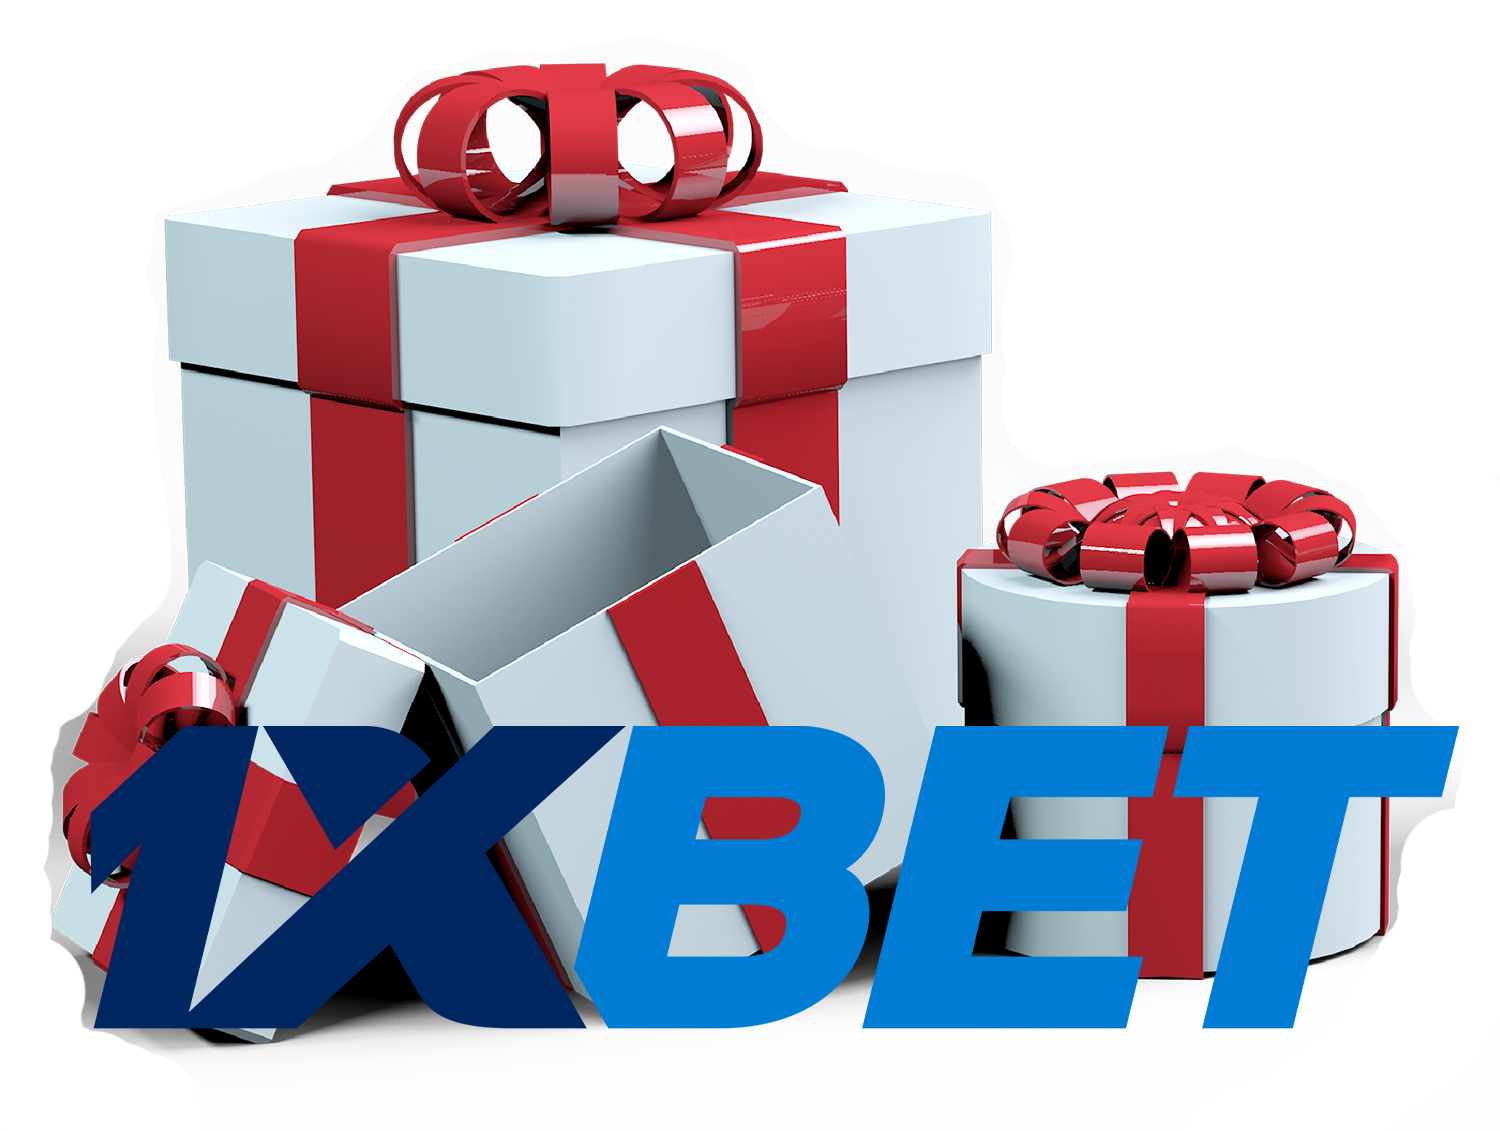 Get your 1xbet bonus right after registration and the first deposit.